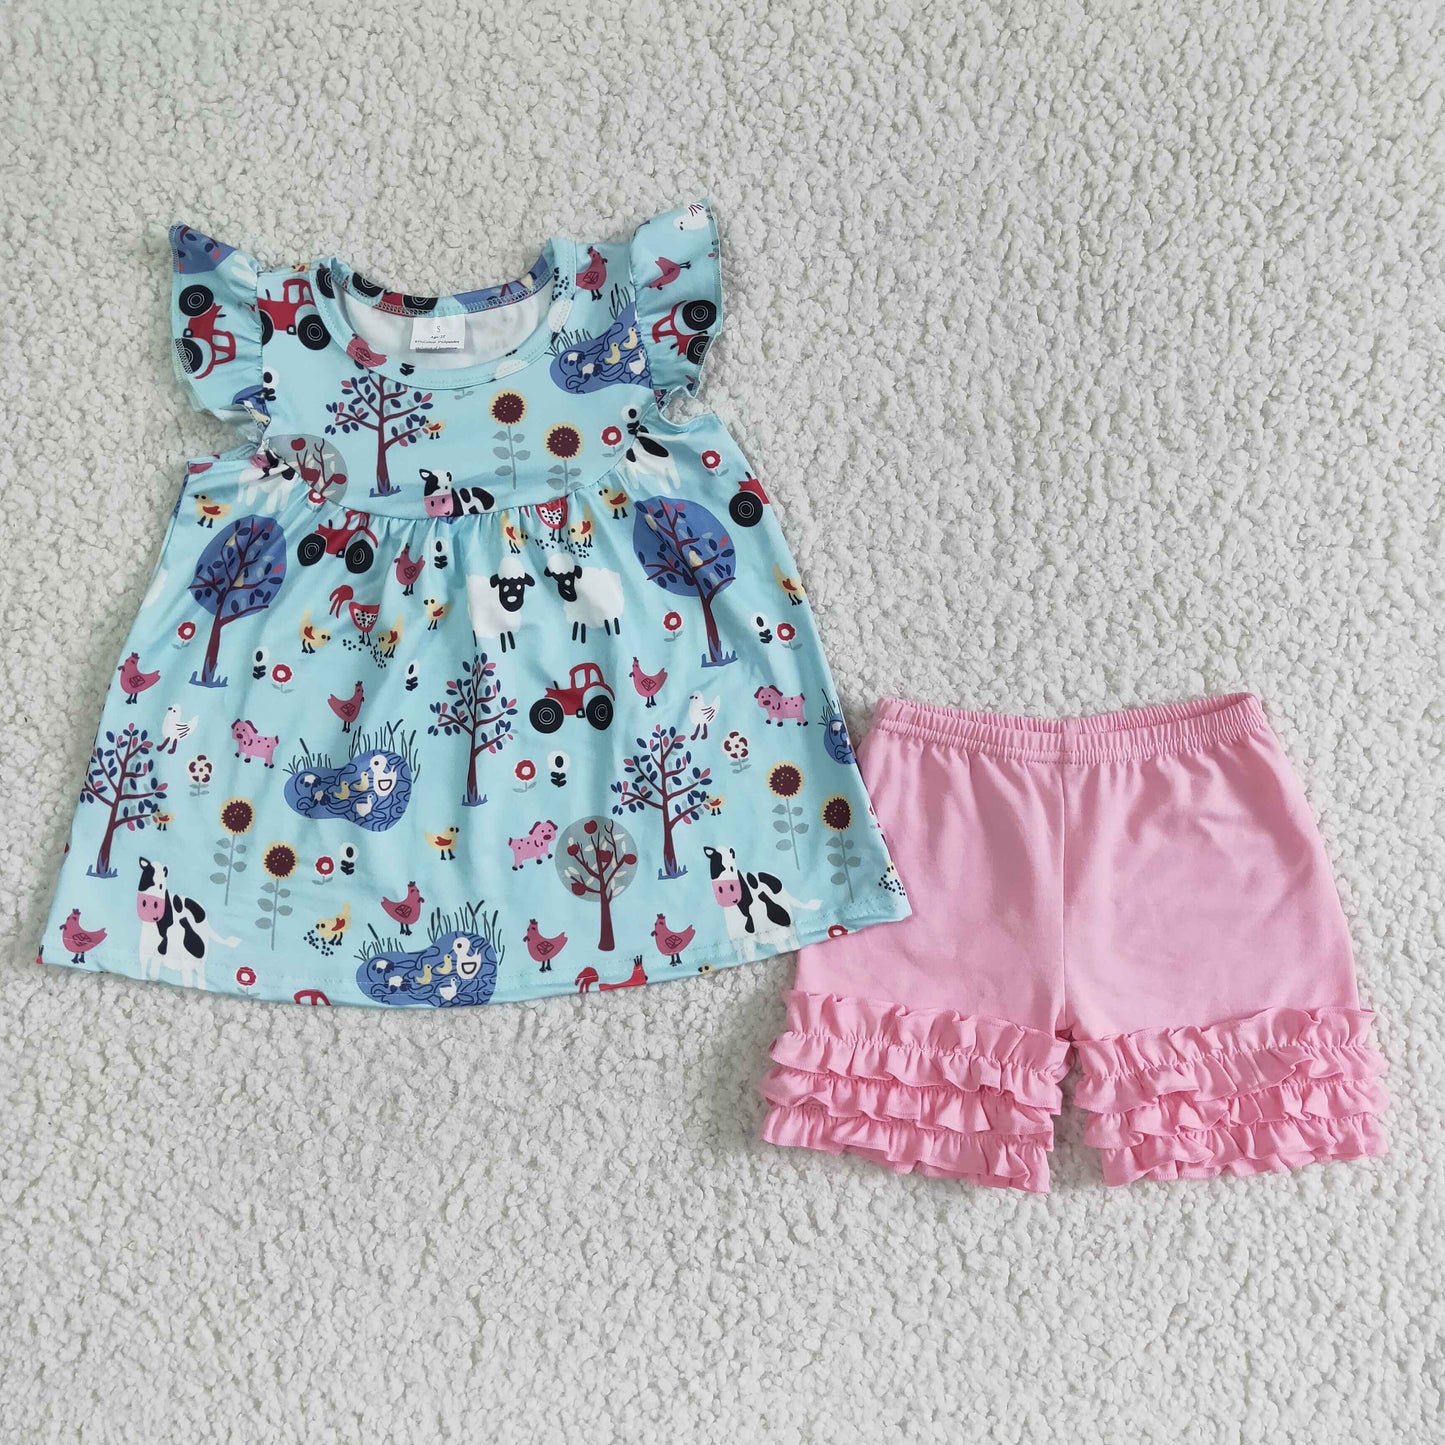 Flutter sleeve farm top pink icing ruffle shorts girls outfits